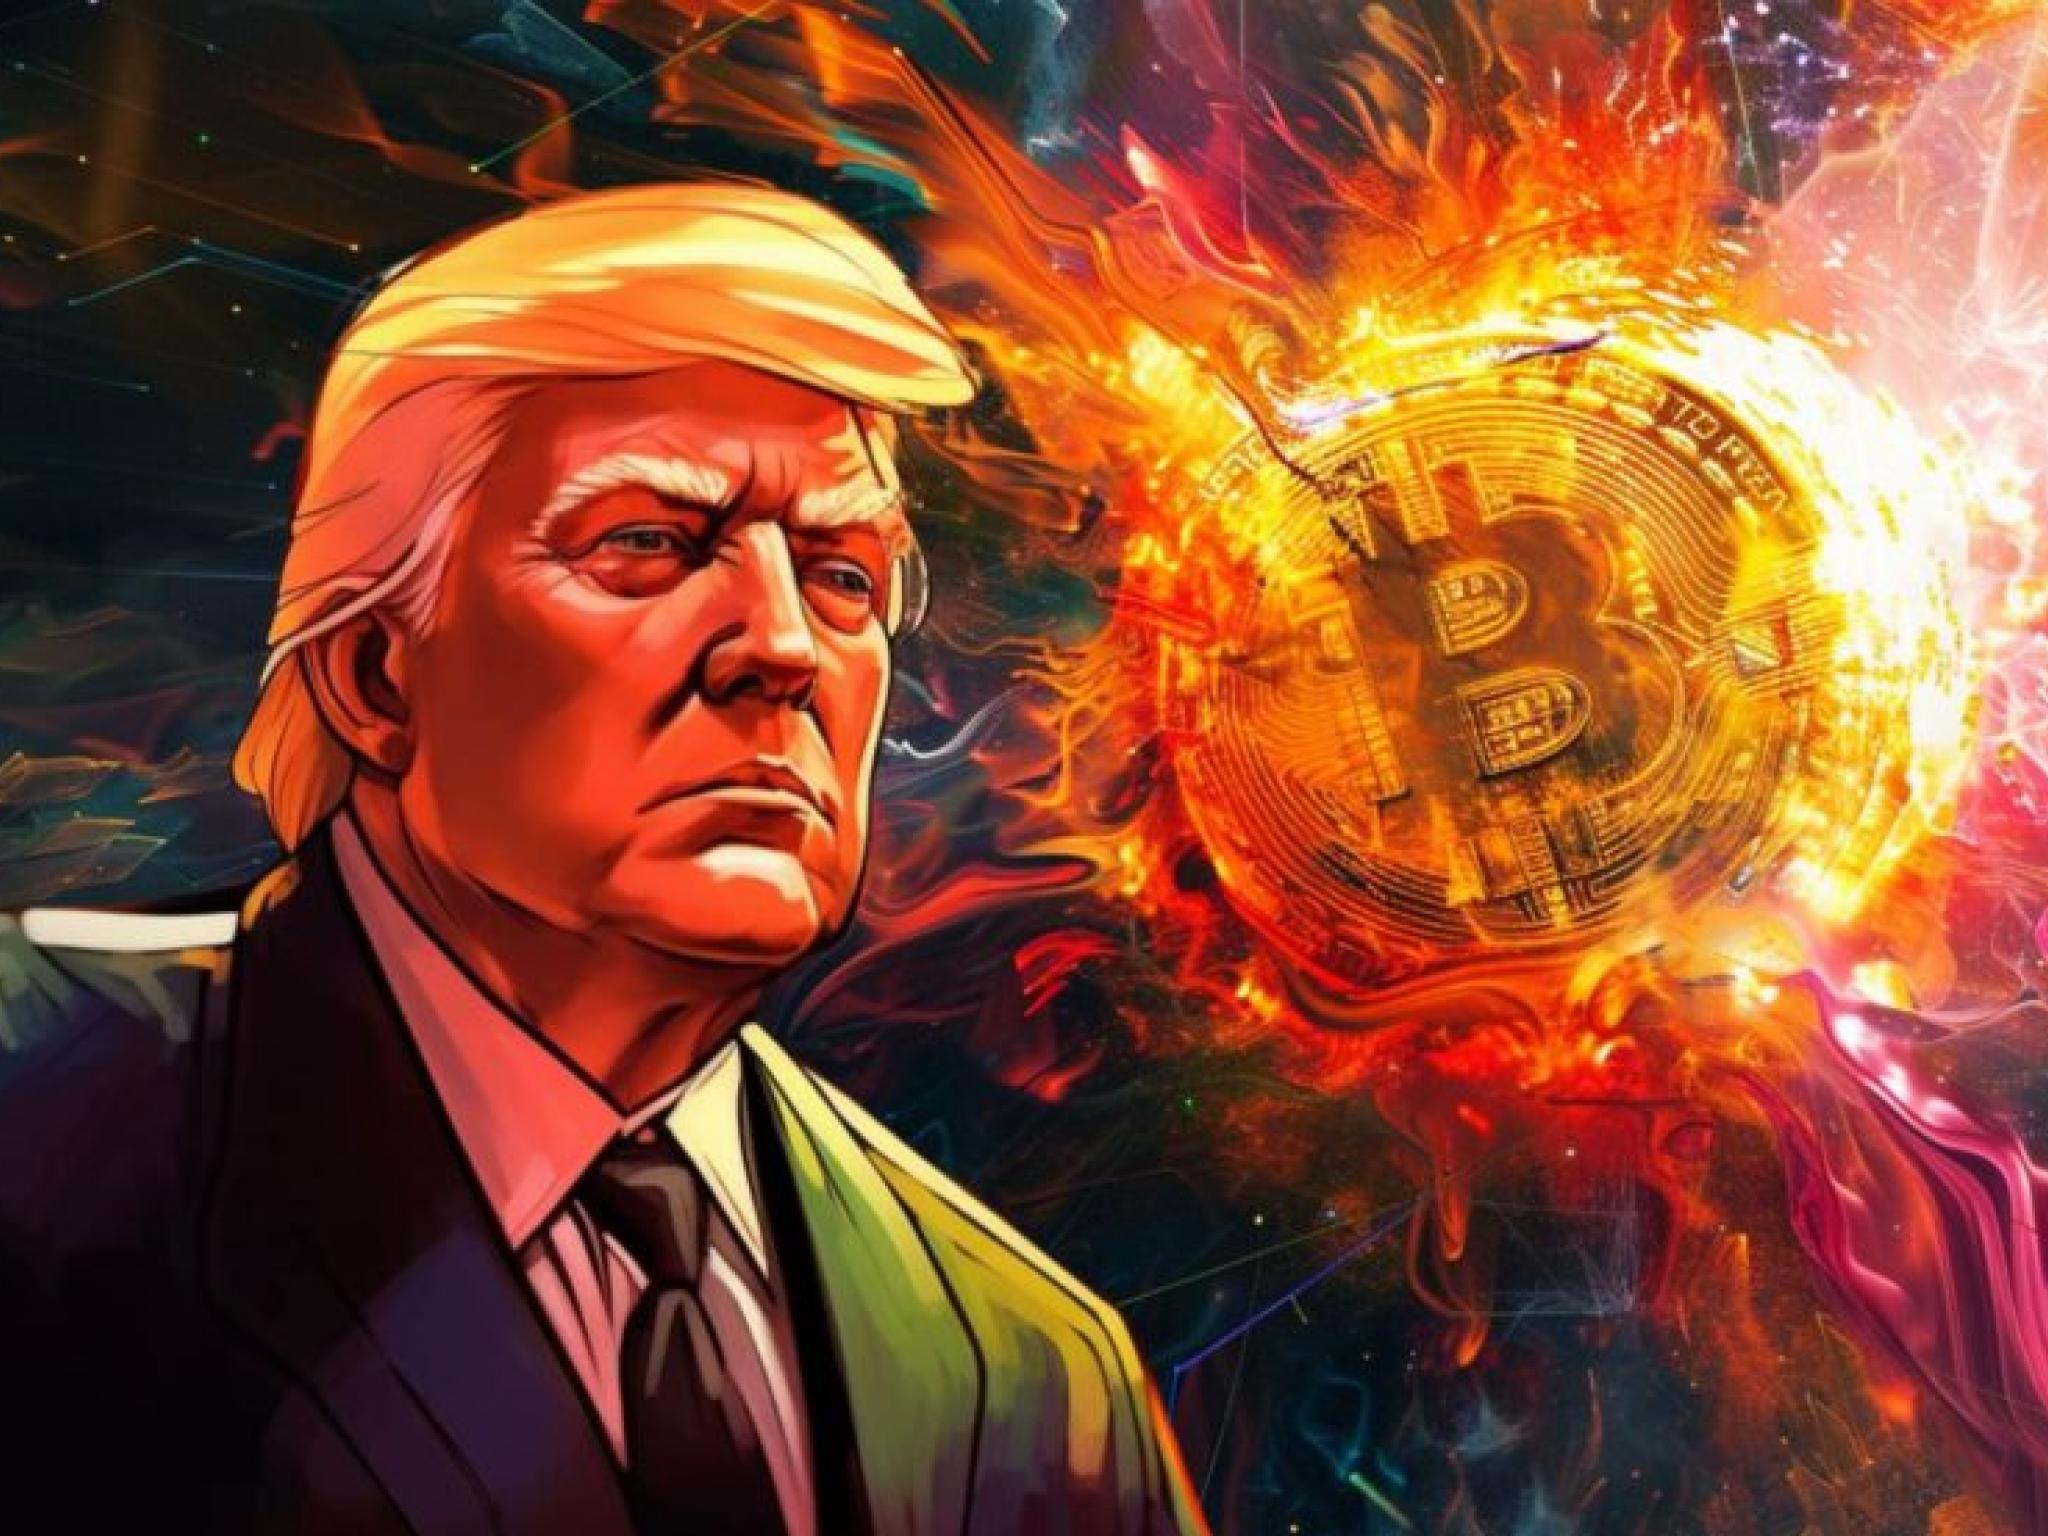  trader-nets-27m-in-3-days-with-trump-related-maga-coin 